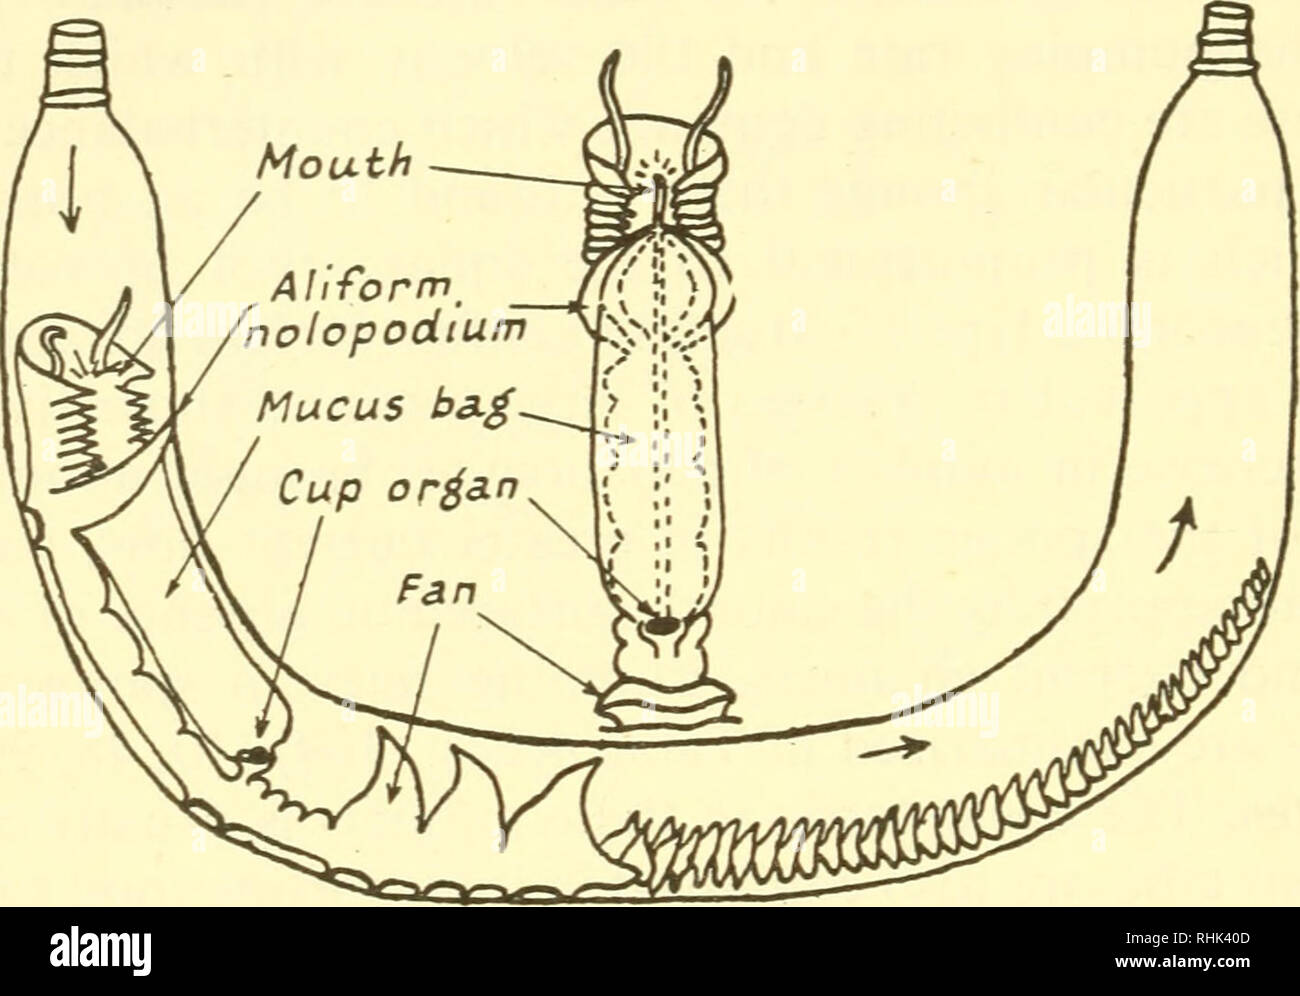 . The biology of marine animals. Marine animals; Physiology, Comparative. 208 THE BIOLOGY OF MARINE ANIMALS and thence to the buccal funnel. MacGinitie has also described an altern- ative mode of feeding by formation of a mucus-bag. This is produced by the aliform notopodia and extends posteriorly to a dorsal cup organ where it is rolled up. All the water which flows through the burrow must traverse this net, which filters out suspended food matter. At intervals the front margin is detached and the net is transported anteriorly to the mouth by. Fig. 5.3. Mucus-bag Feeding in a Tubicolous Polyc Stock Photo